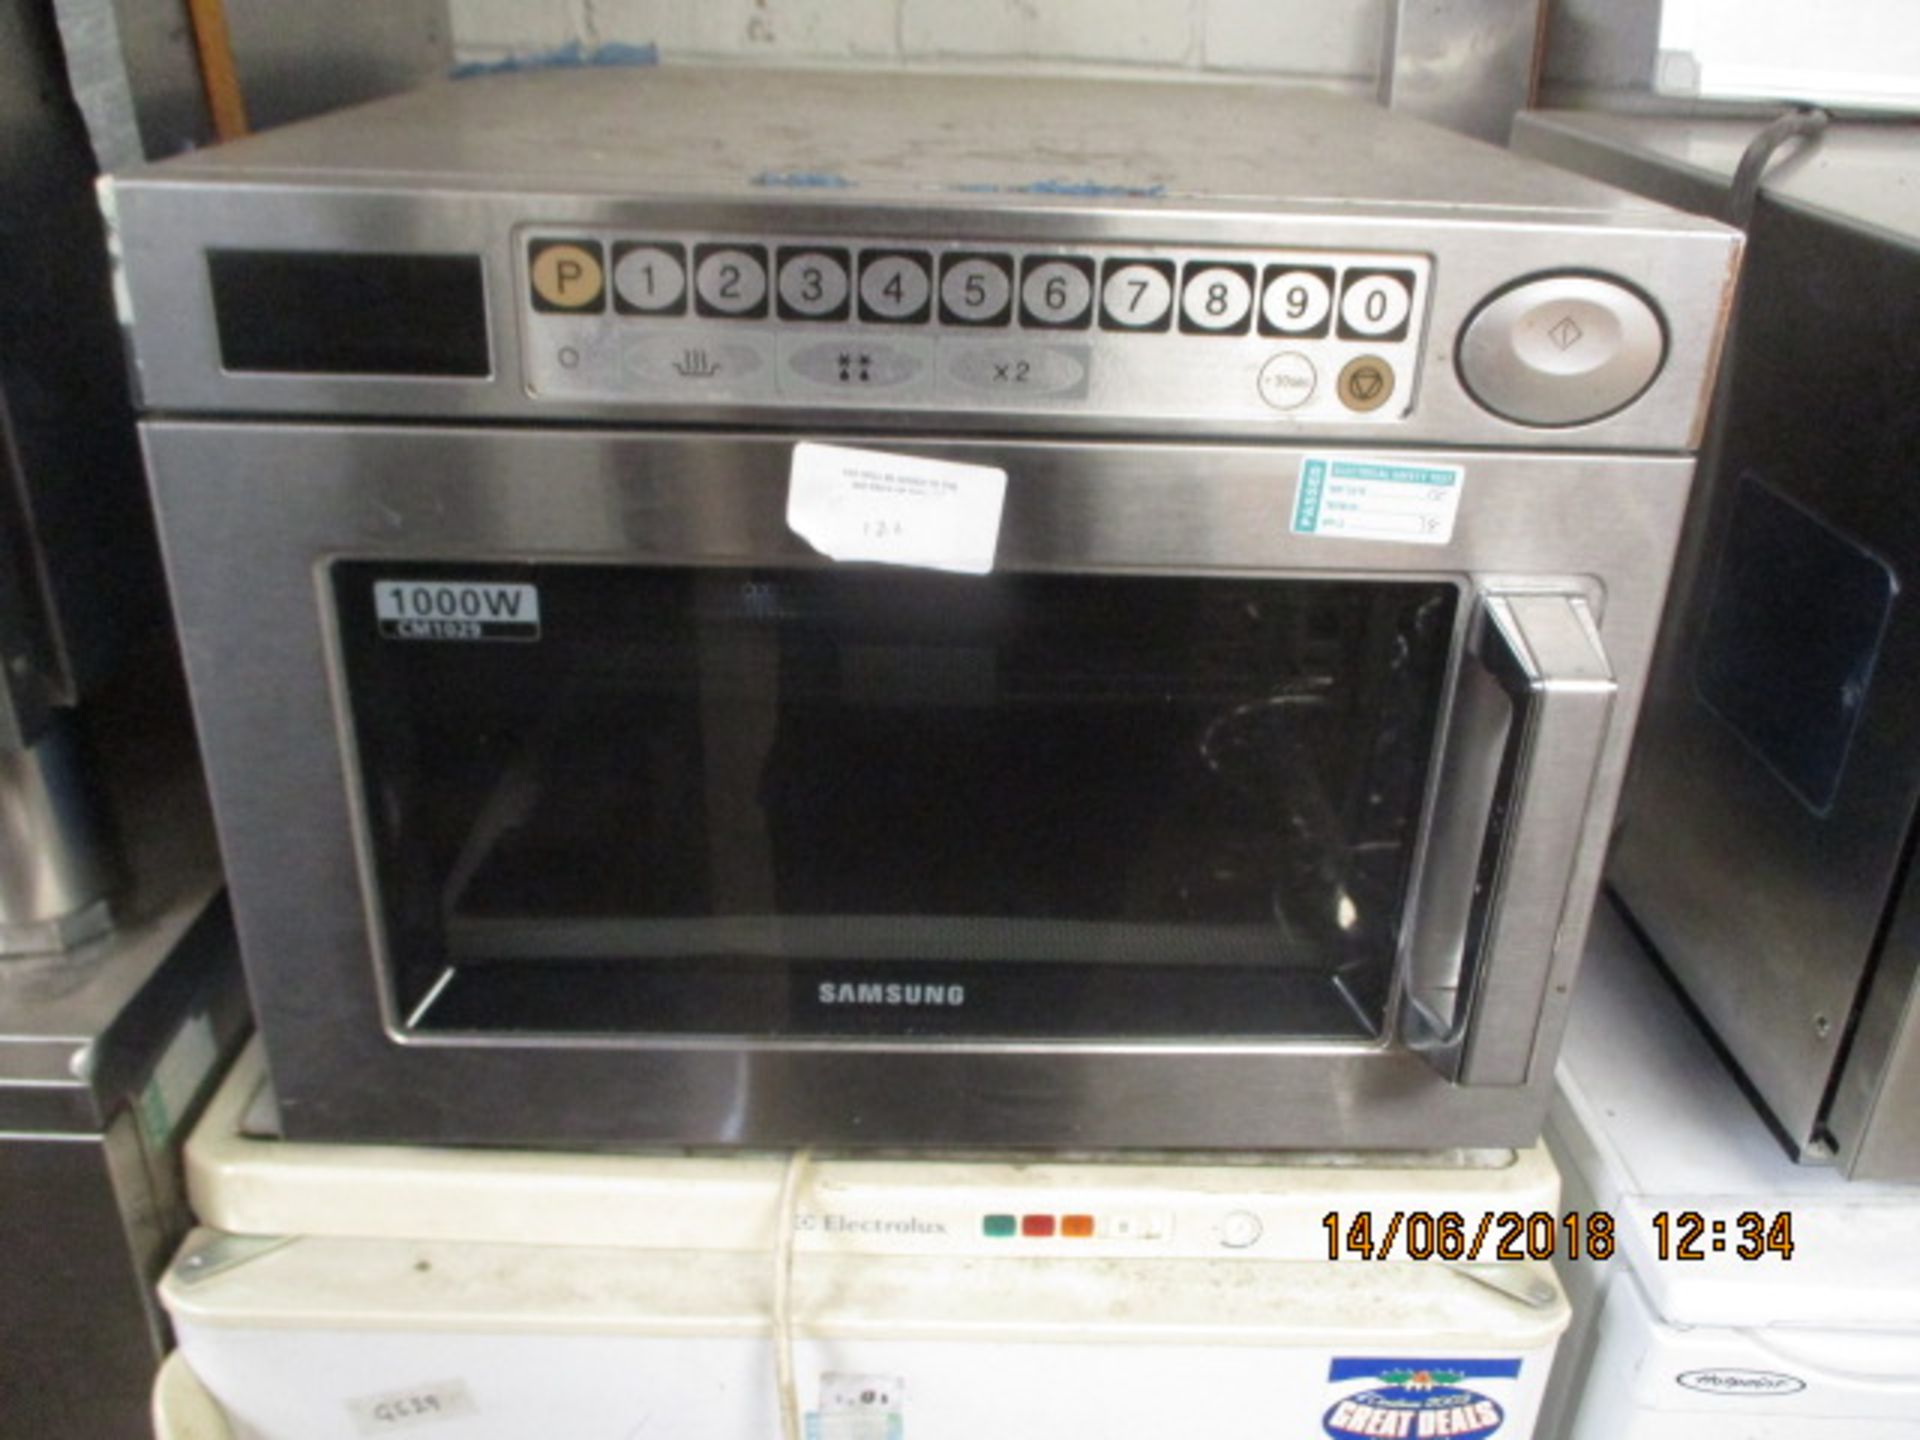 (78) 50cm Samsung 1000w commercial microwave oven